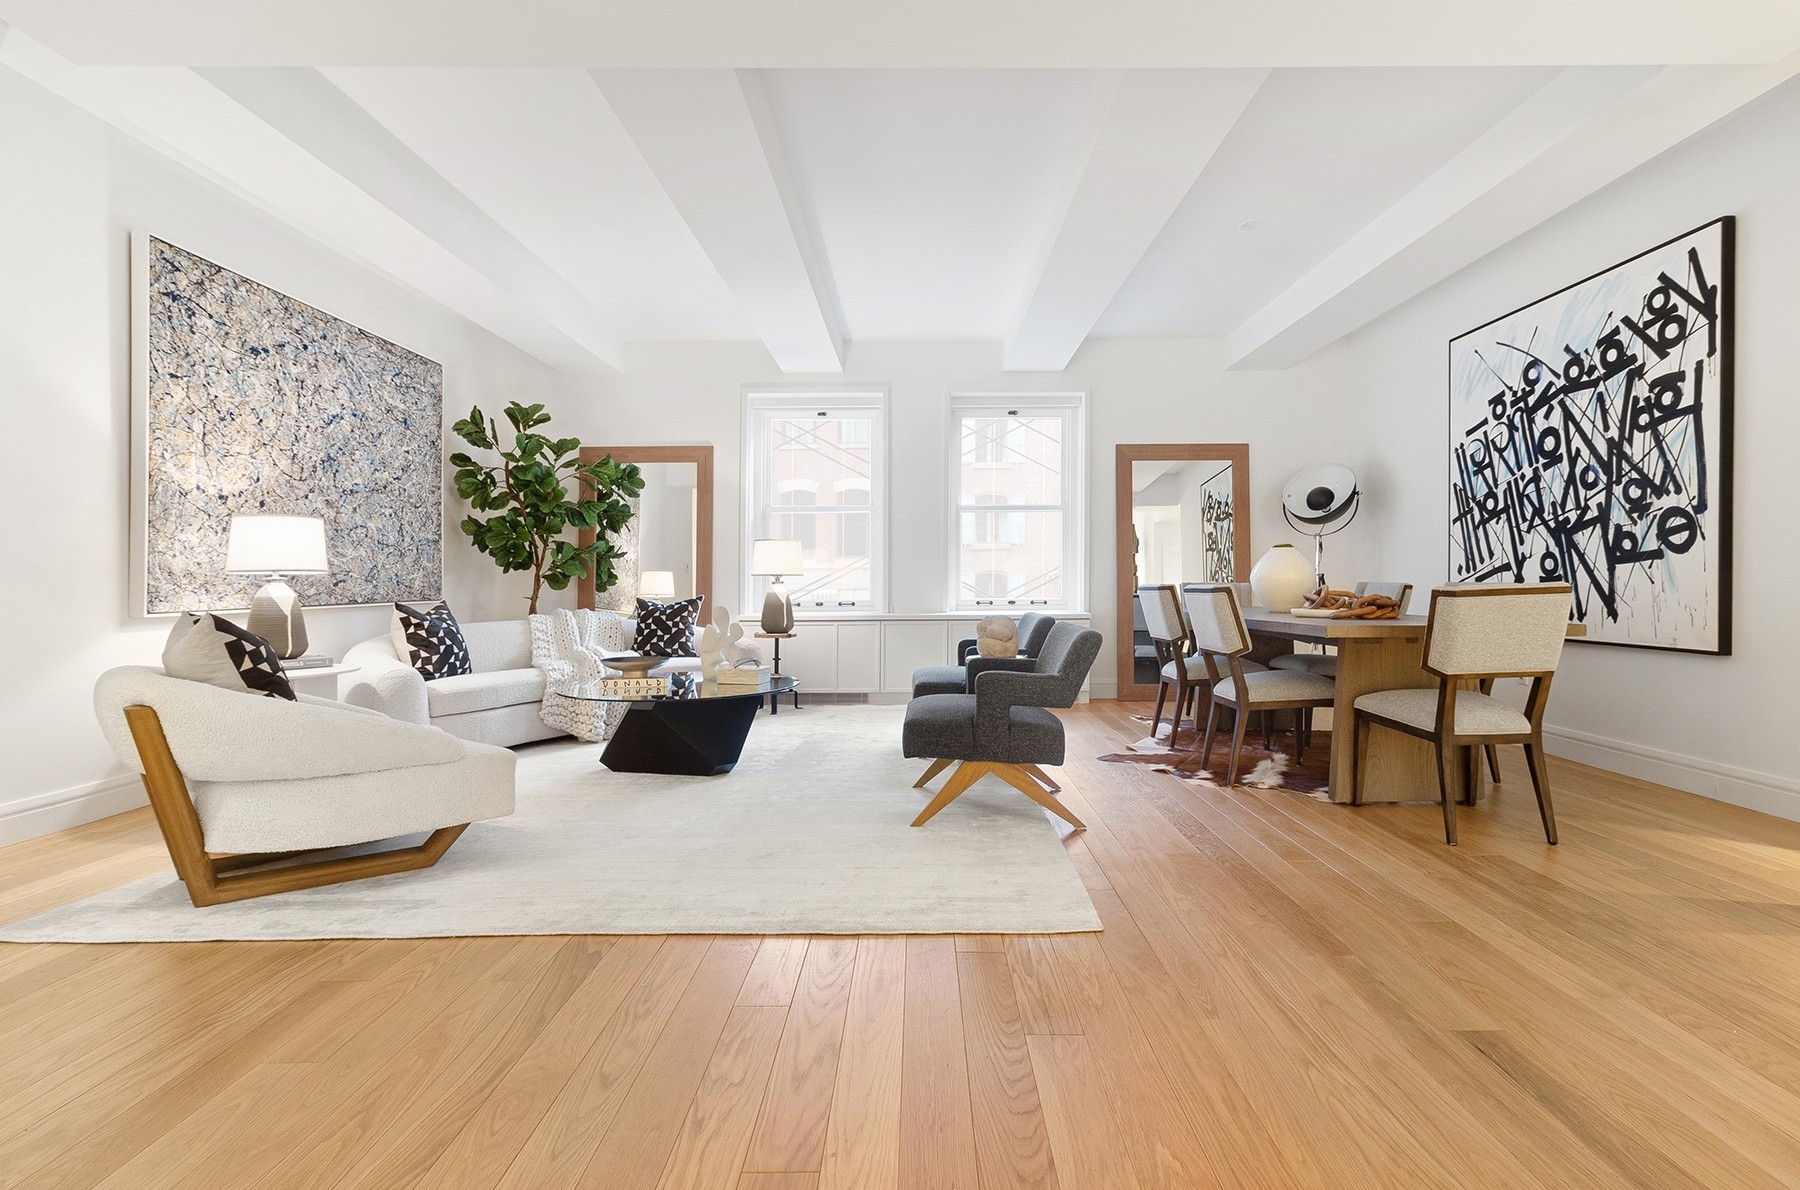 Property at The Sterling Mason, 71 LAIGHT ST, 4B New York